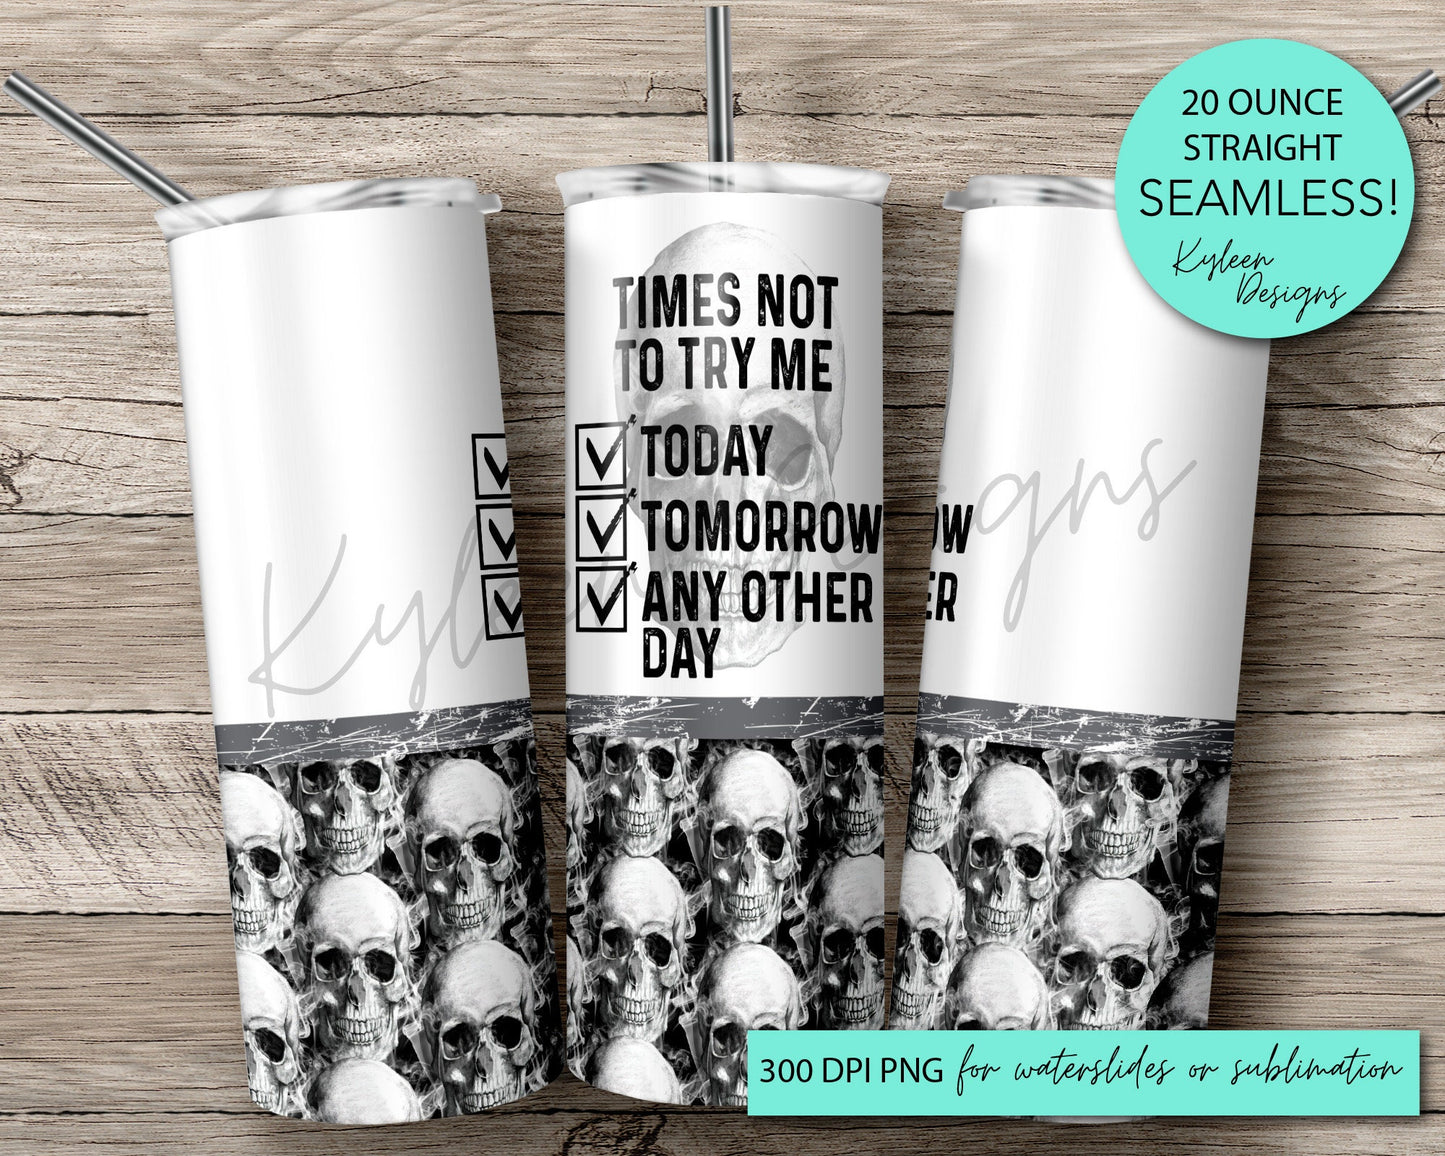 SEAMLESS Times not to try me 20 ounce tumbler wrap for sublimation, waterslide High res PNG digital file- Straight only